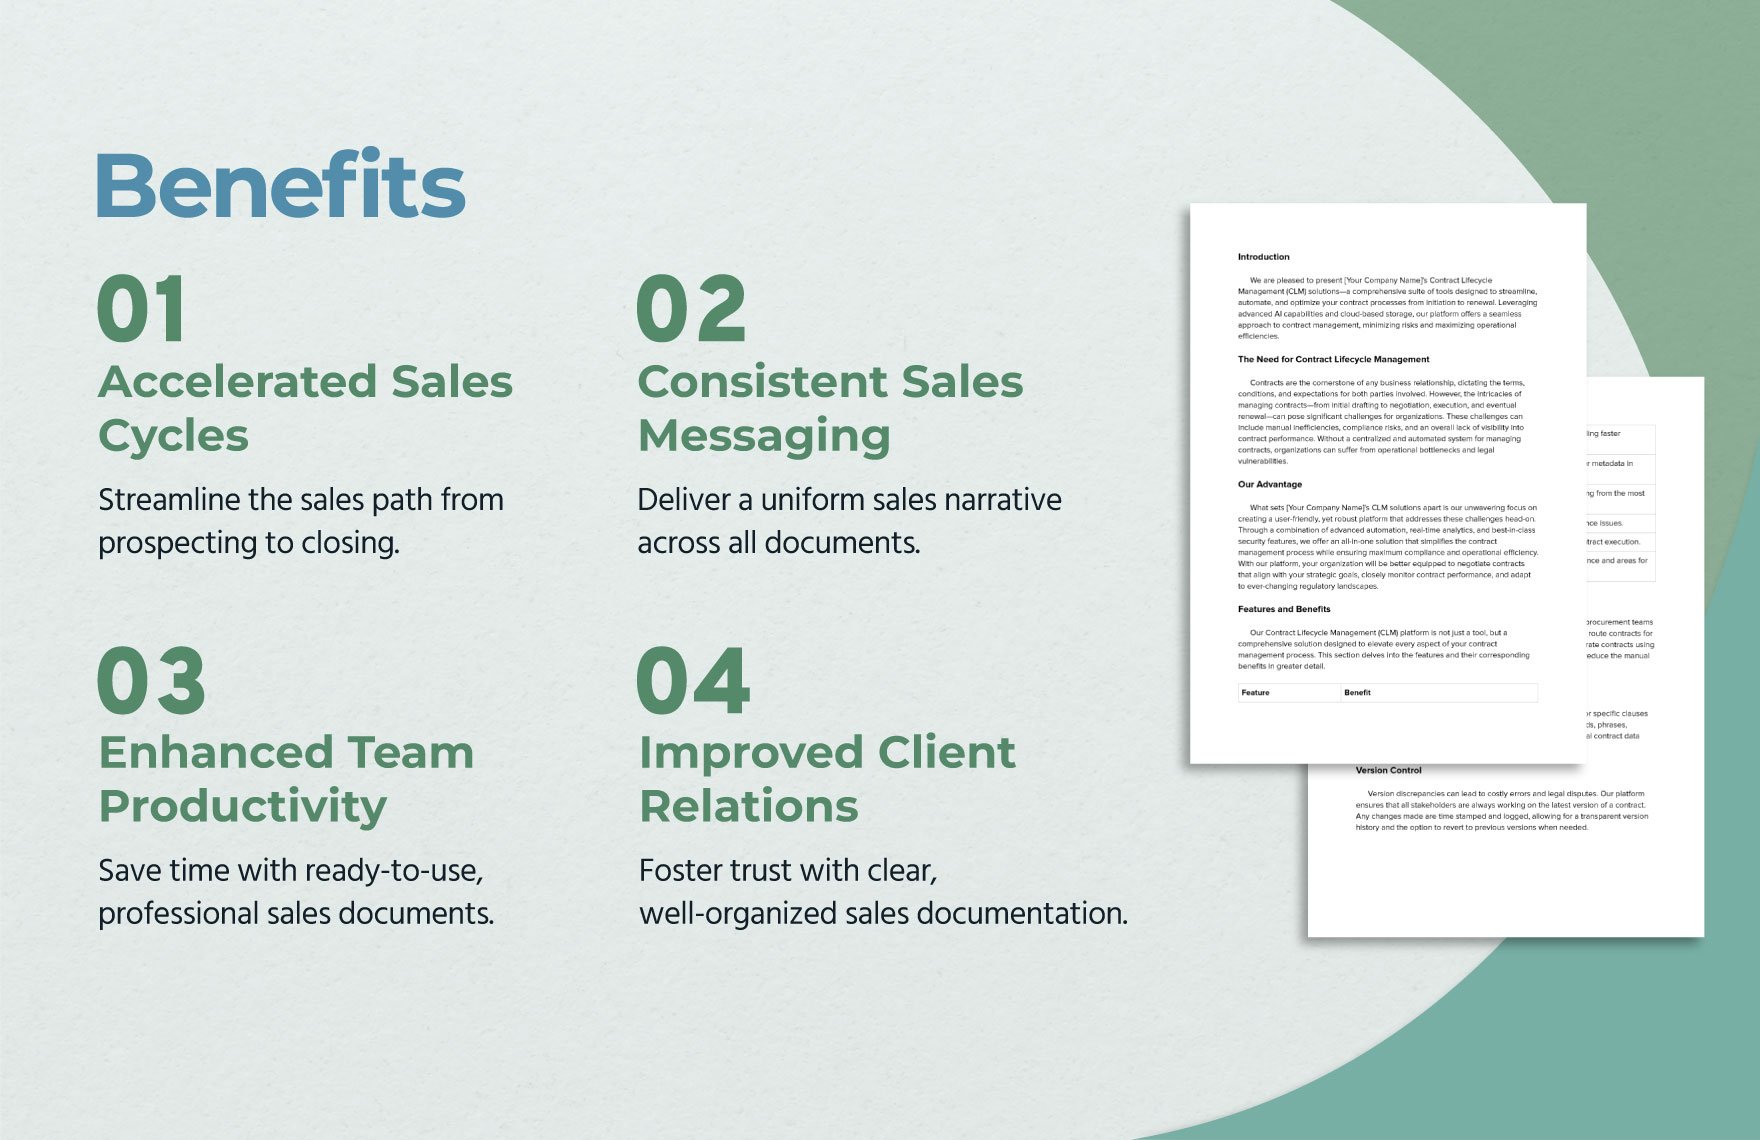 Sales Document on Contract Lifecycle Management Template